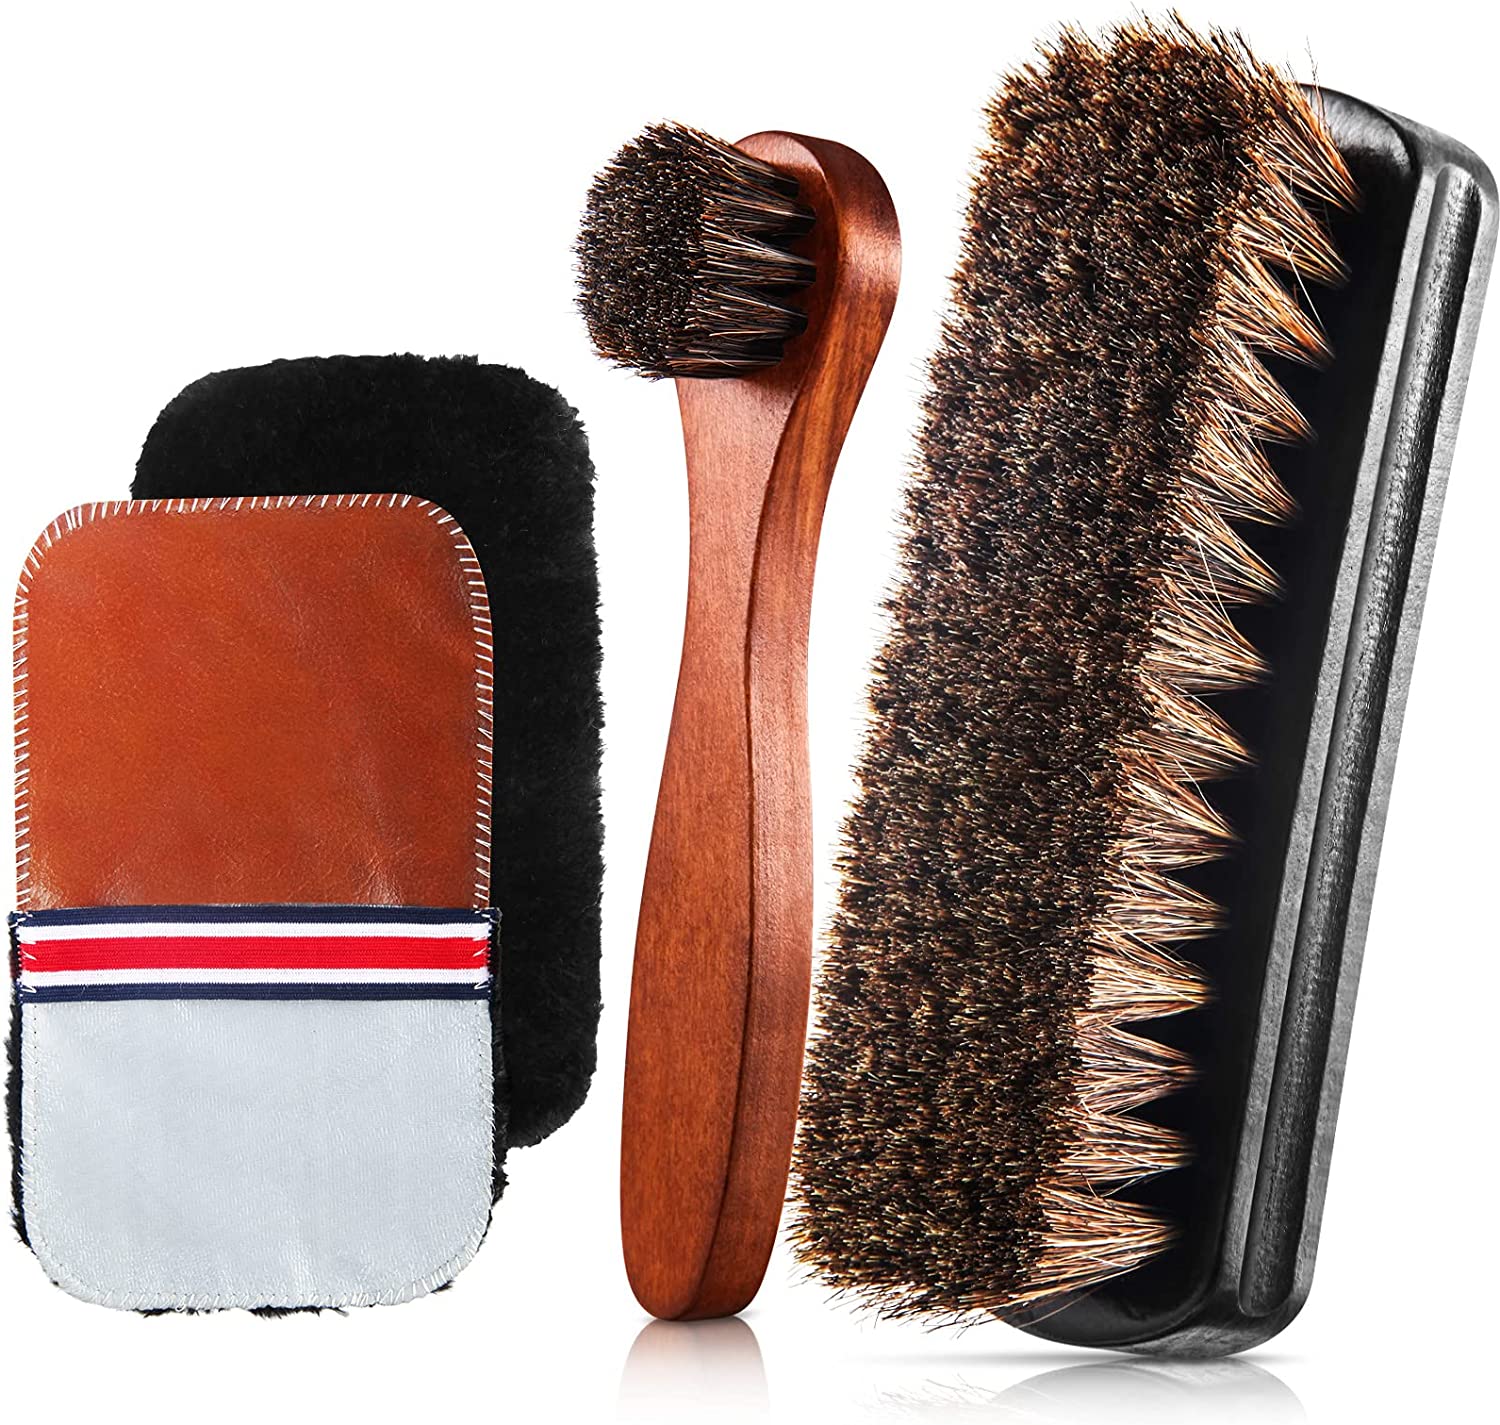 Horsehair Shine Shoes Brush Kit Polish Dauber Applicators Cleaning Leather Shoes Boots Care Brushes Suede Cleaner Brush with Microfiber Shoe Gloves - 4 Pcs